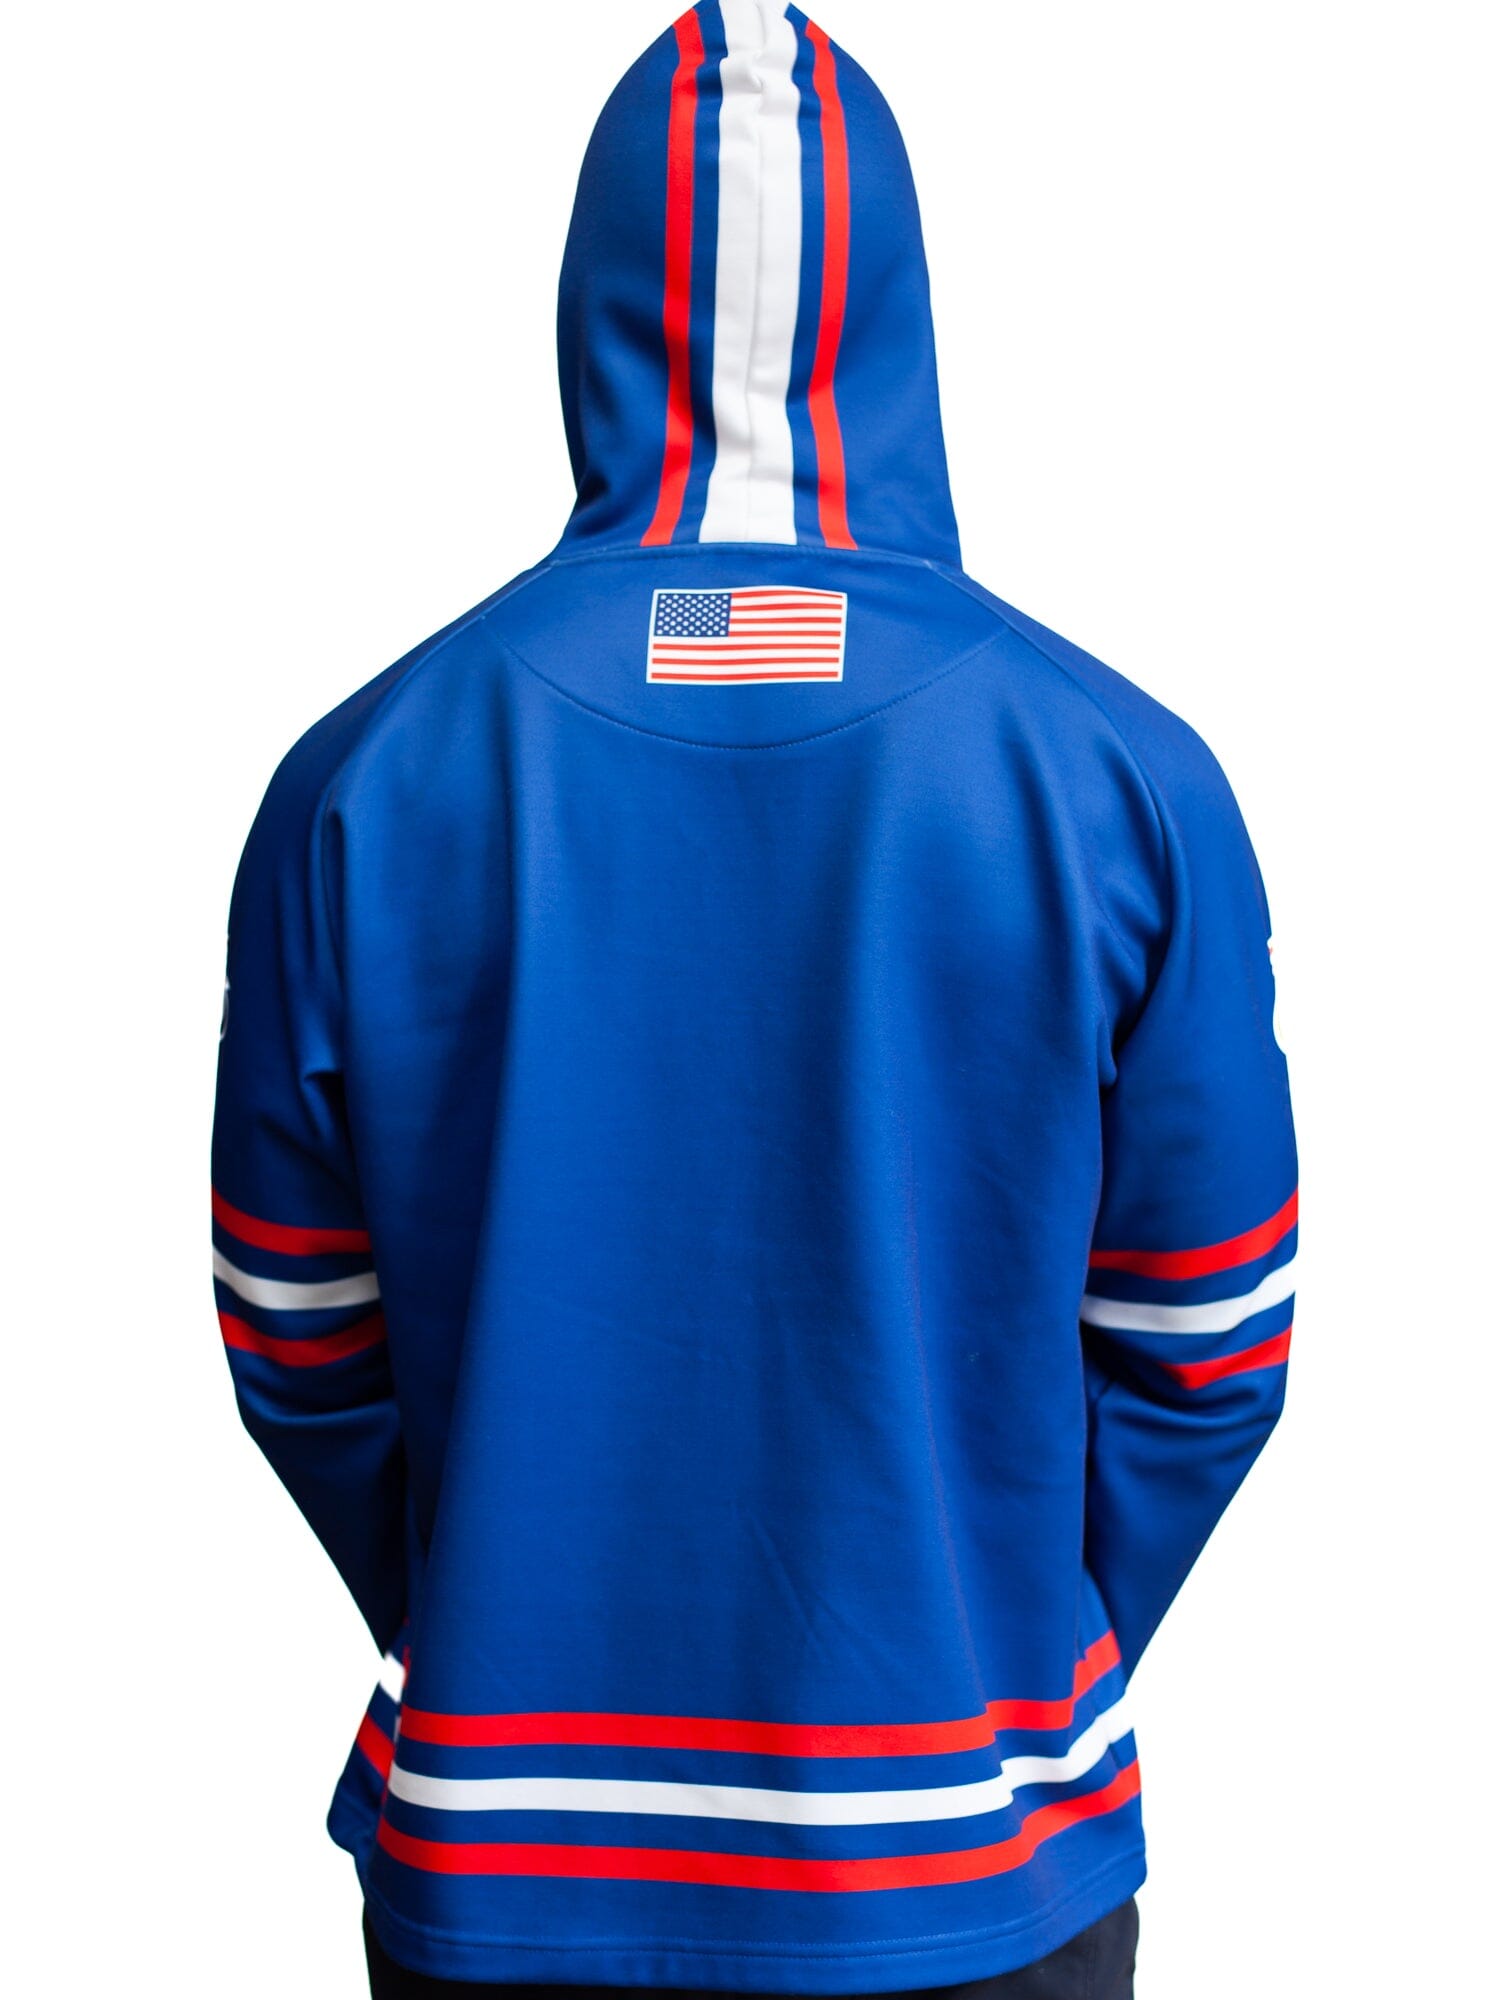 Outerstuff NHL Youth New York Rangers '22-'23 Special Edition Pullover Hoodie - L Each